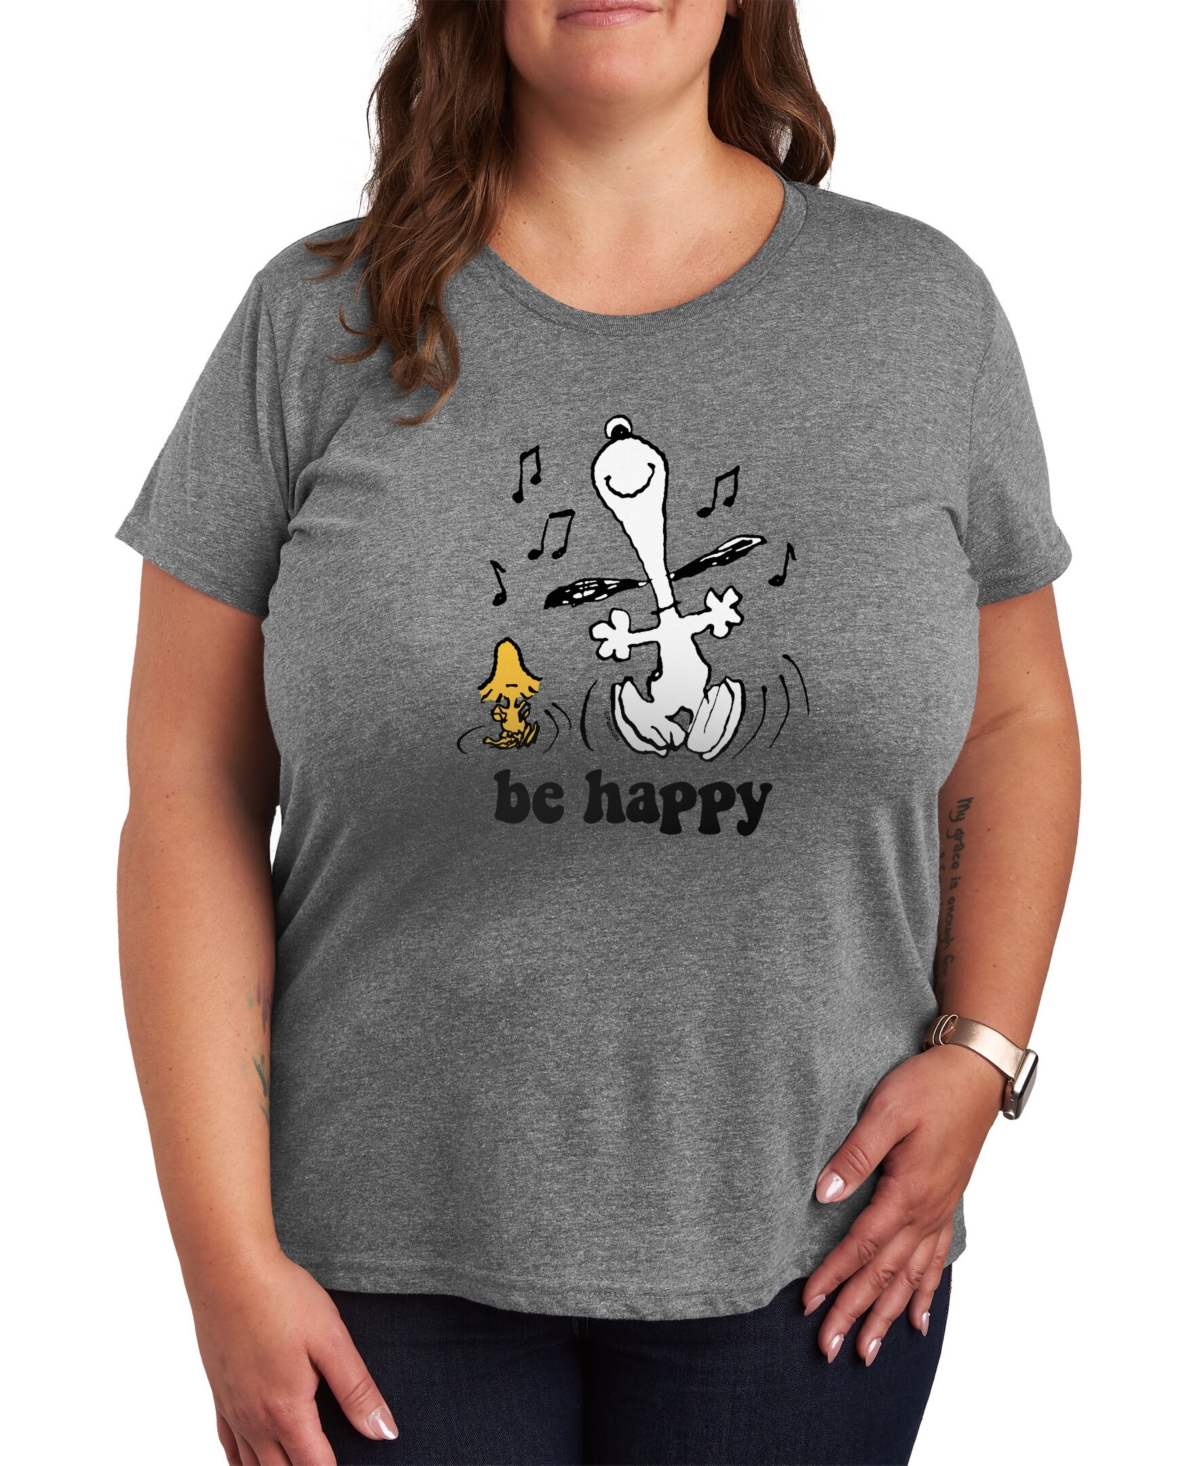 Air Waves Trendy Plus Size Graphic T-shirt In Gray